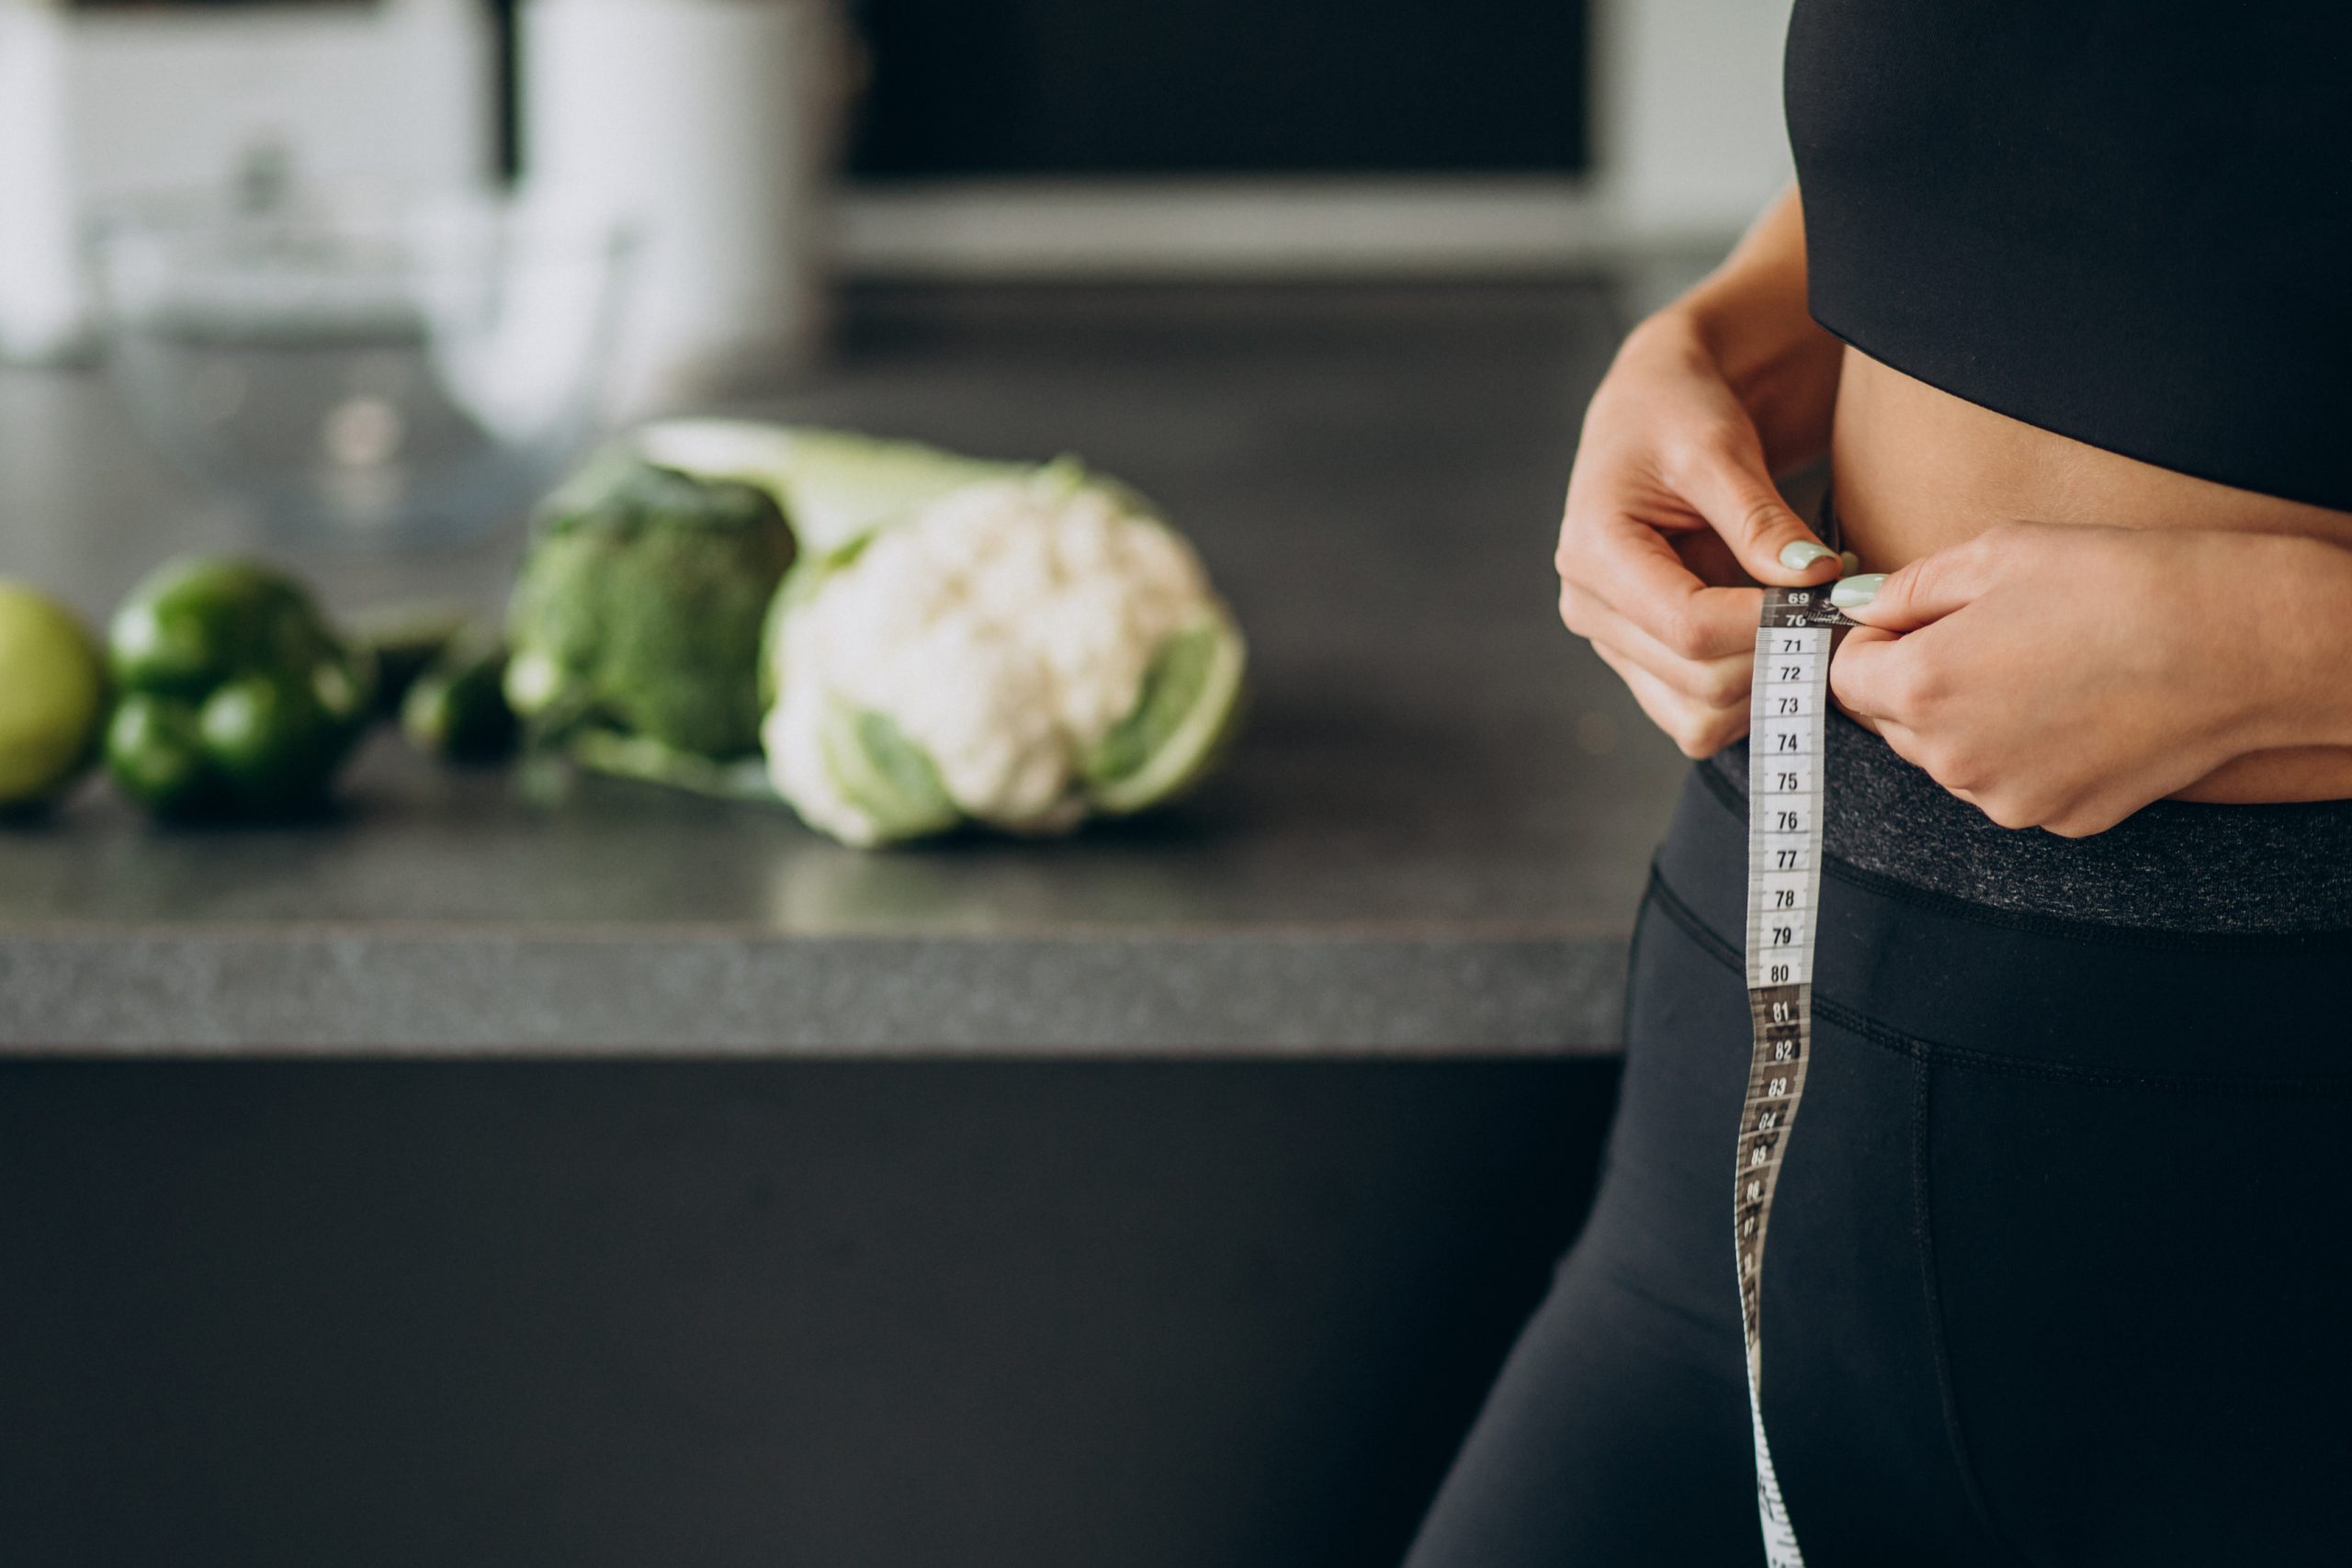 Discover 5 proven strategies for sustainable weight loss with Weightox Rx